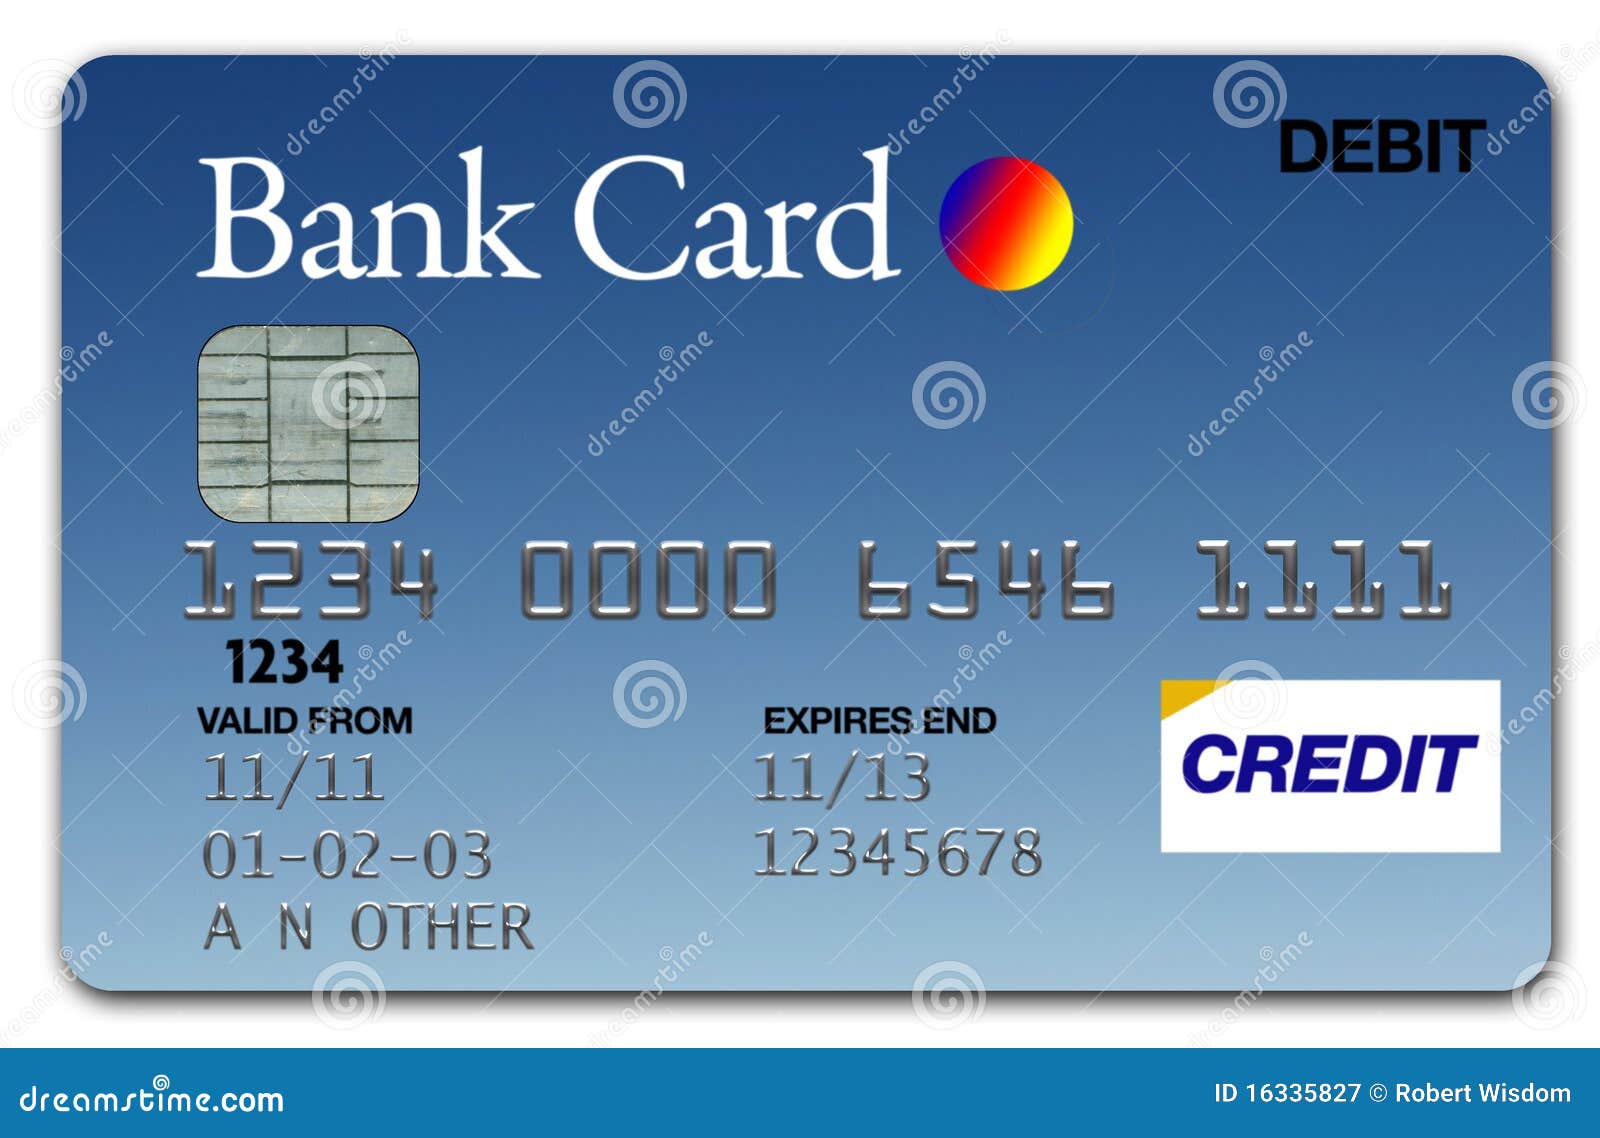 Visa Card Blue stock image. Image of store, online, expiry ...